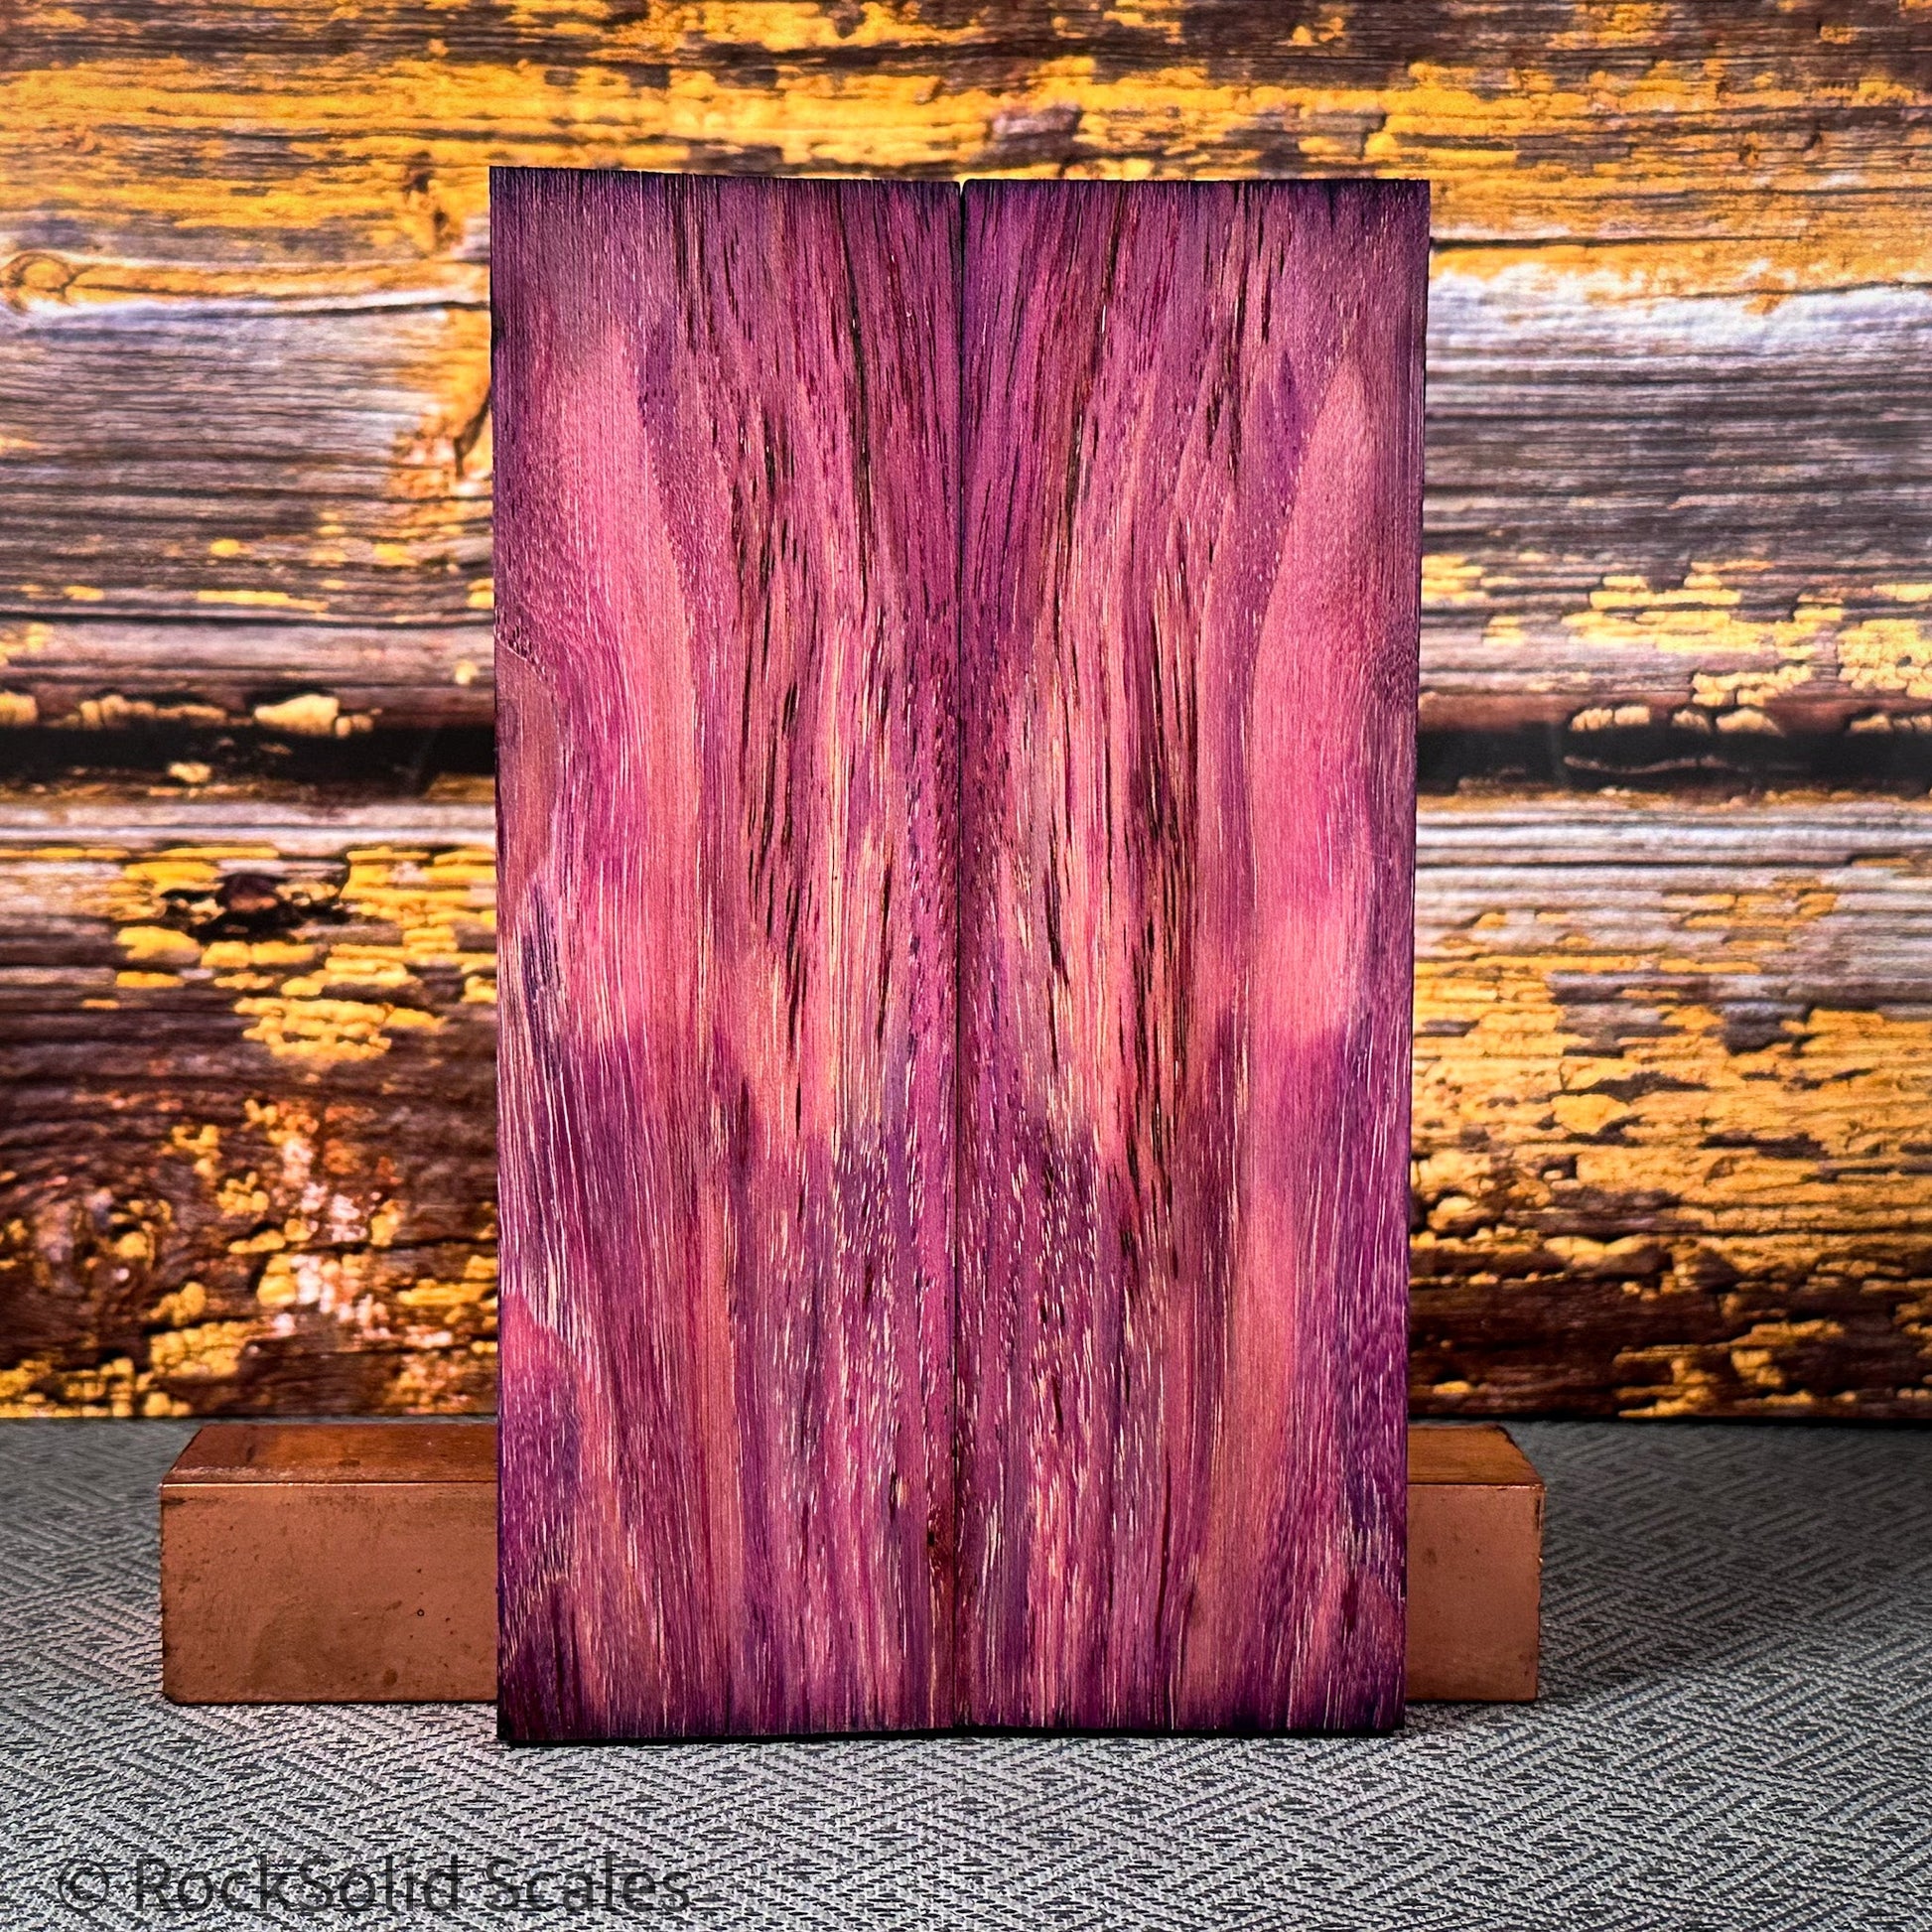 #2357 - Magenta and Blue Spalted Pecan - RockSolid Scales -